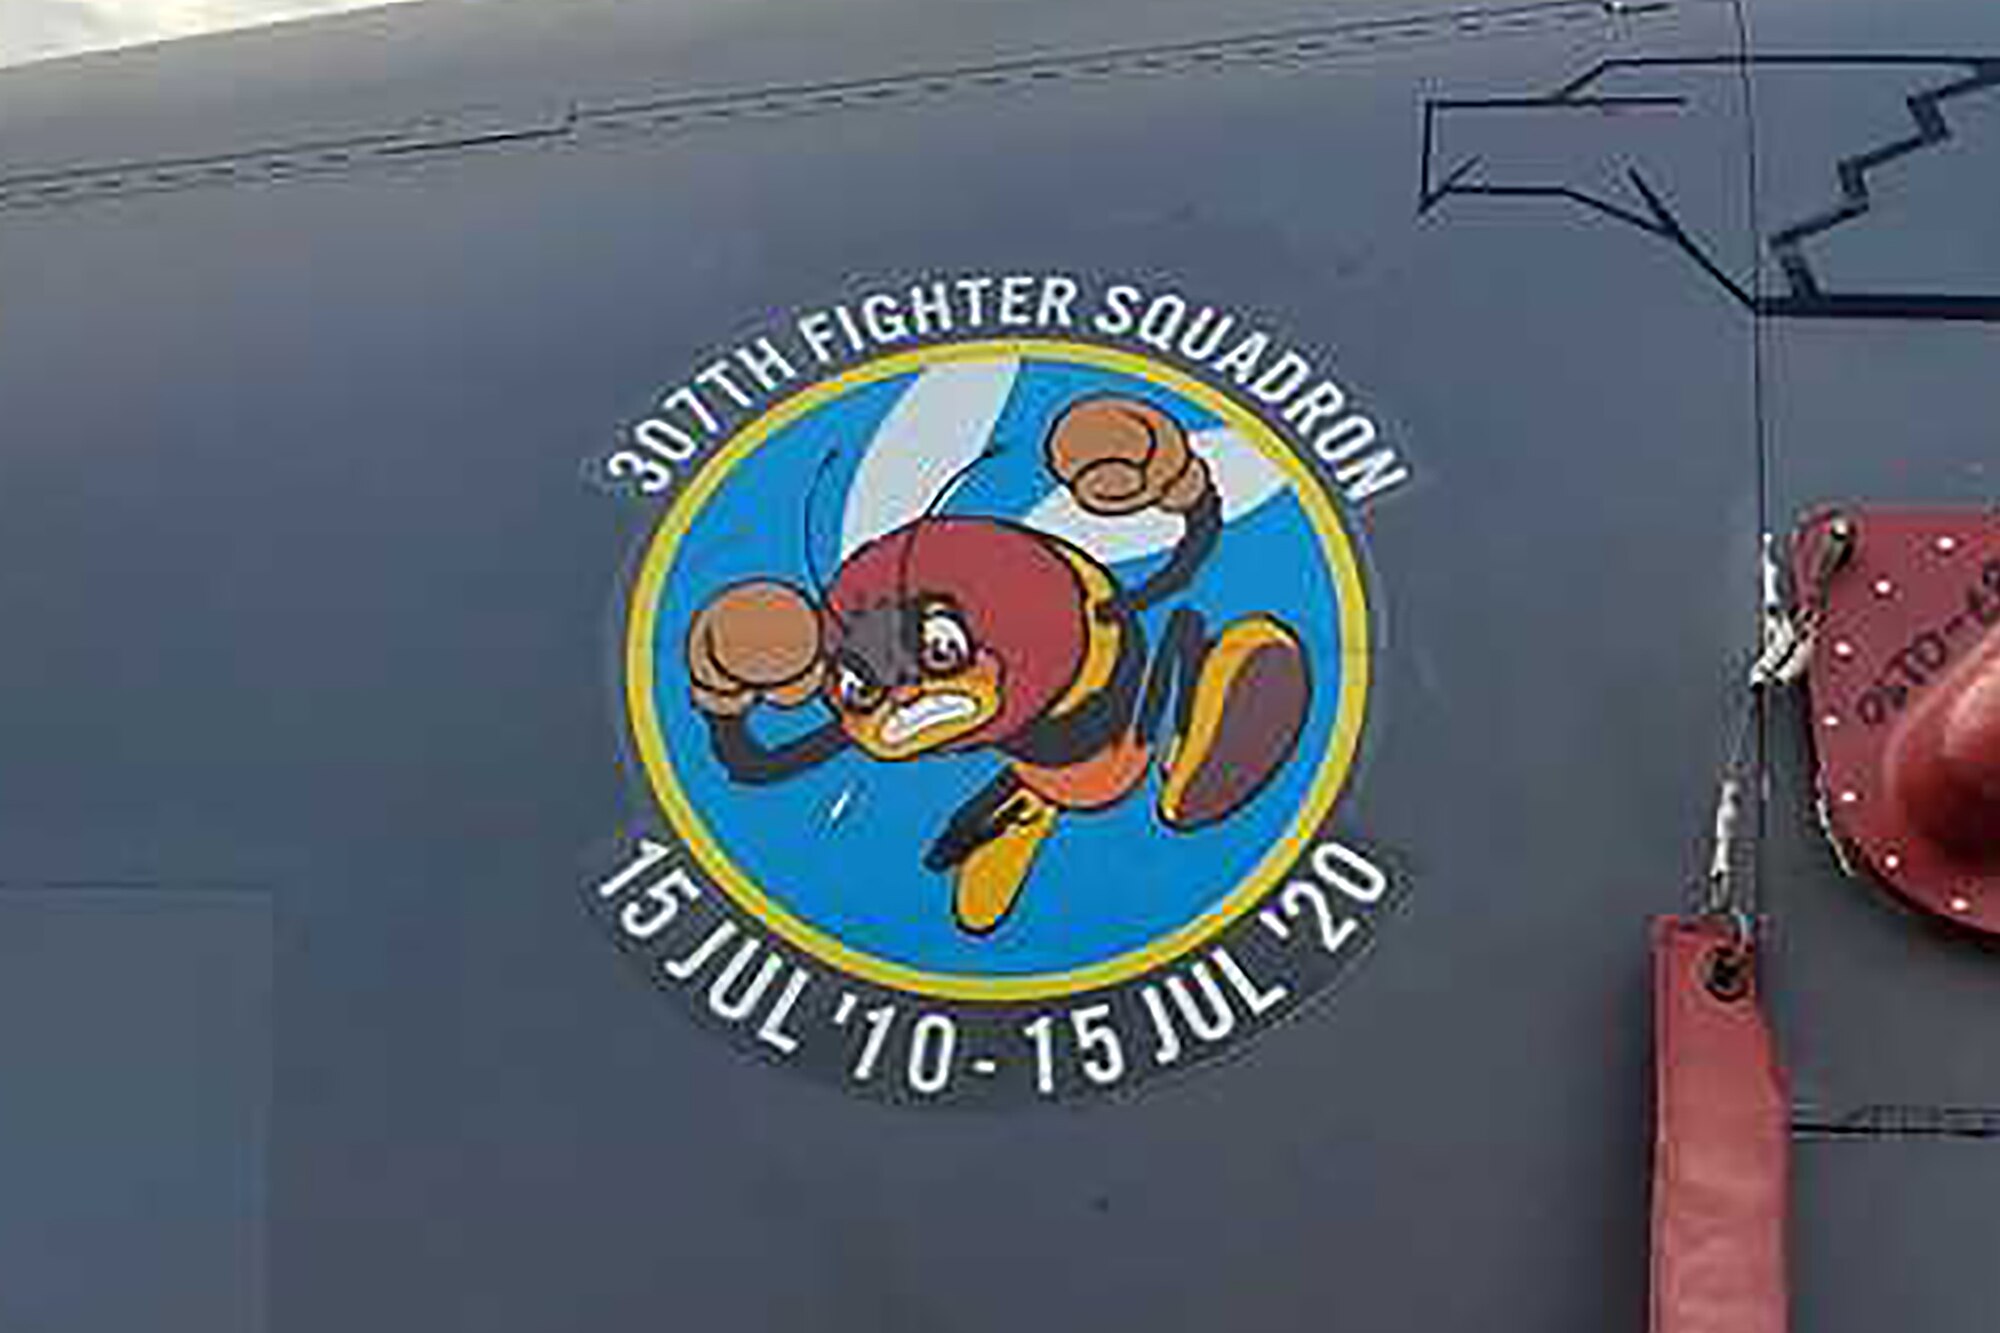 The 414th Fighter Group, a geographically separated unit of the 944th Fighter Wing at Luke Air Force Base, Arizona, hit their 10-year anniversary this summer since their reactivation at Seymour Johnson Air Force Base, North Carolina, in July of 2010.